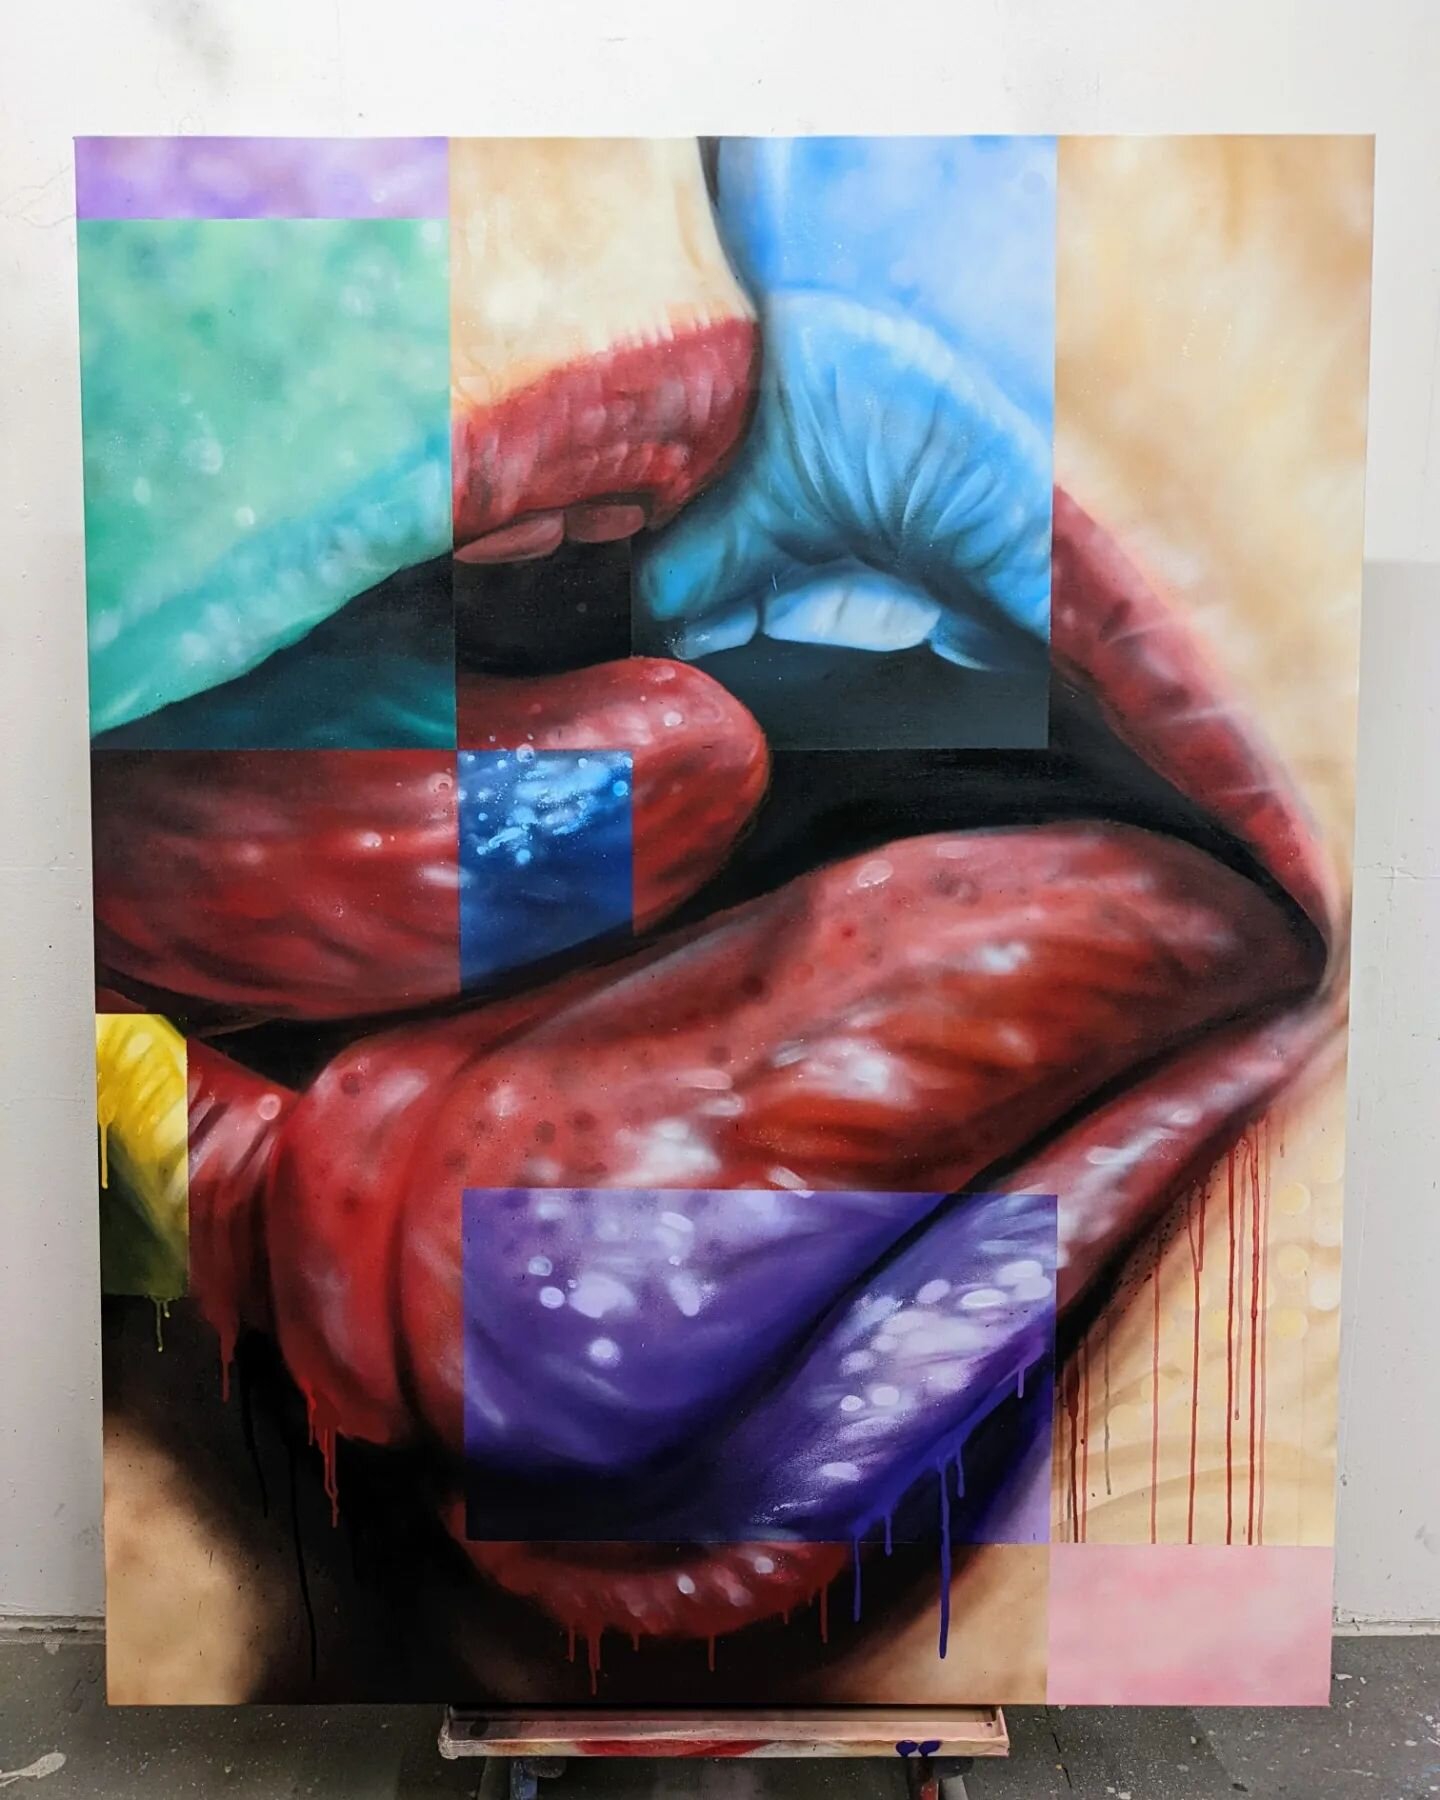 Title: &quot;promiscuously indulgent&quot;
Medium: Spray paint 
Size: 4ft x 5ft
*
Today I have for you another exploration into color separation and composition using human anatomy. 
This painting has a visceral &amp; erotic  motif that I find intere